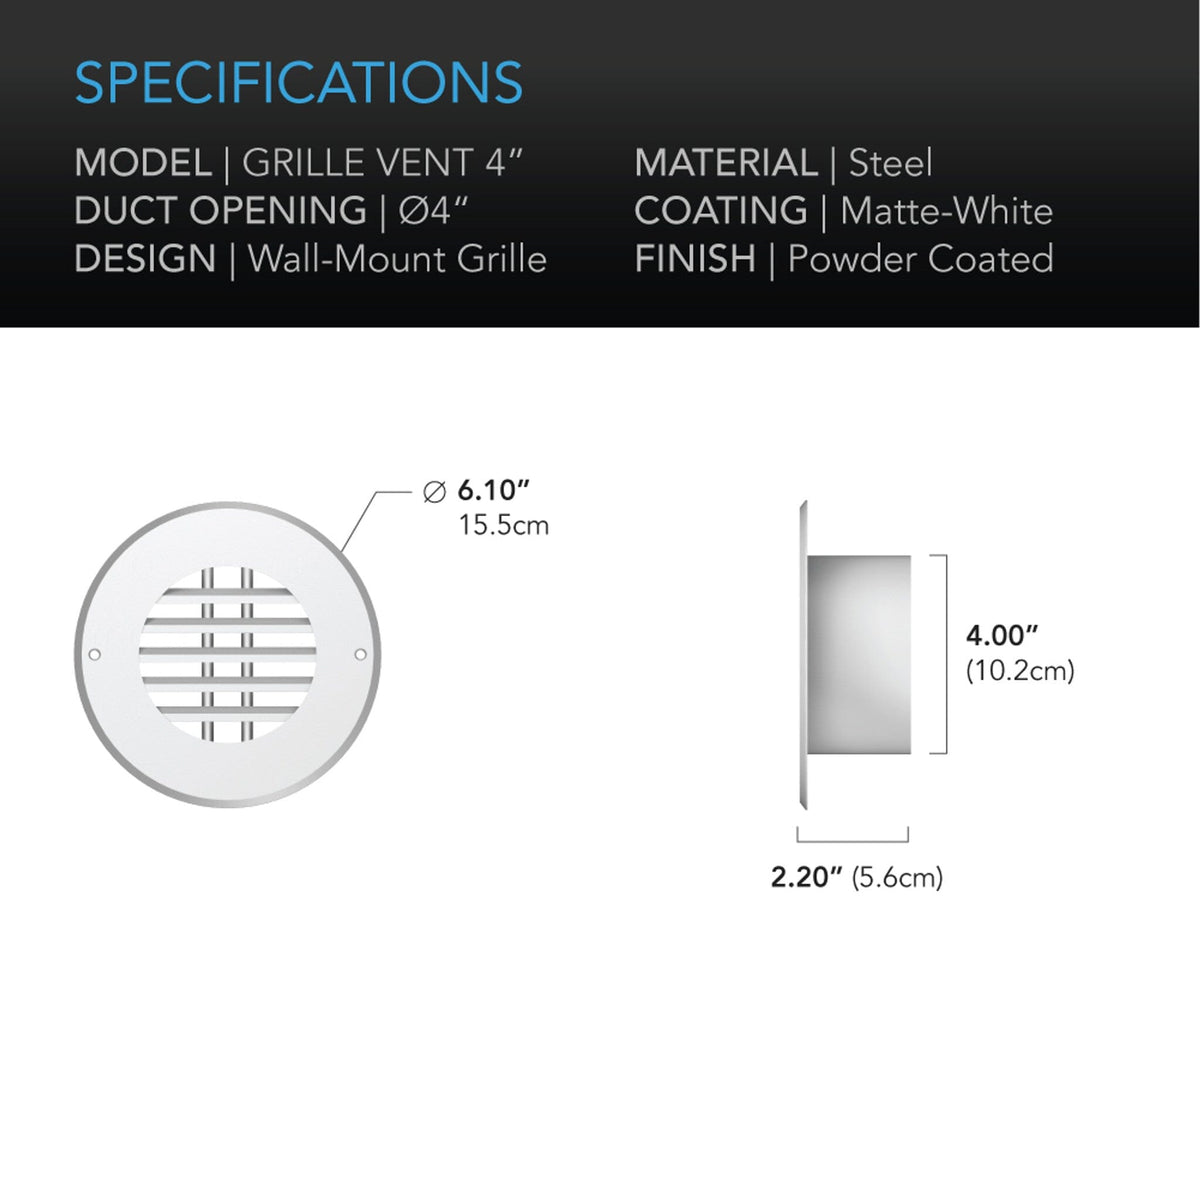 Duct Grille Vent Specifications